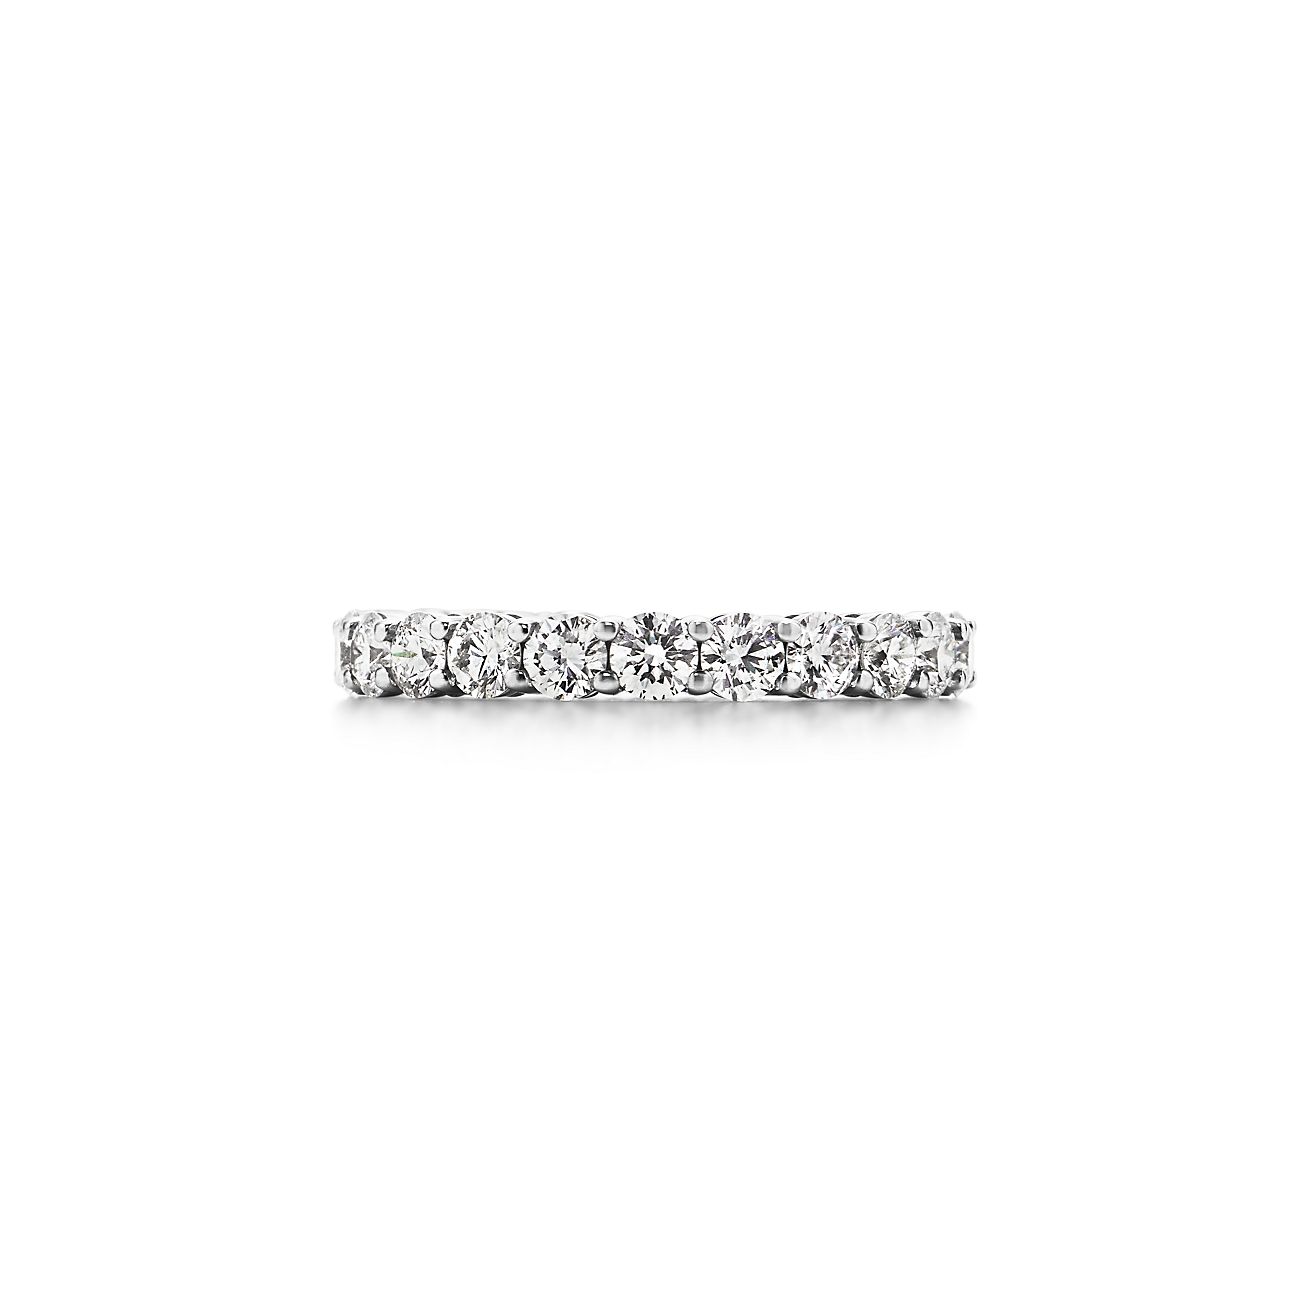 Tiffany Embrace® band ring in platinum with diamonds, 3 mm wide ...